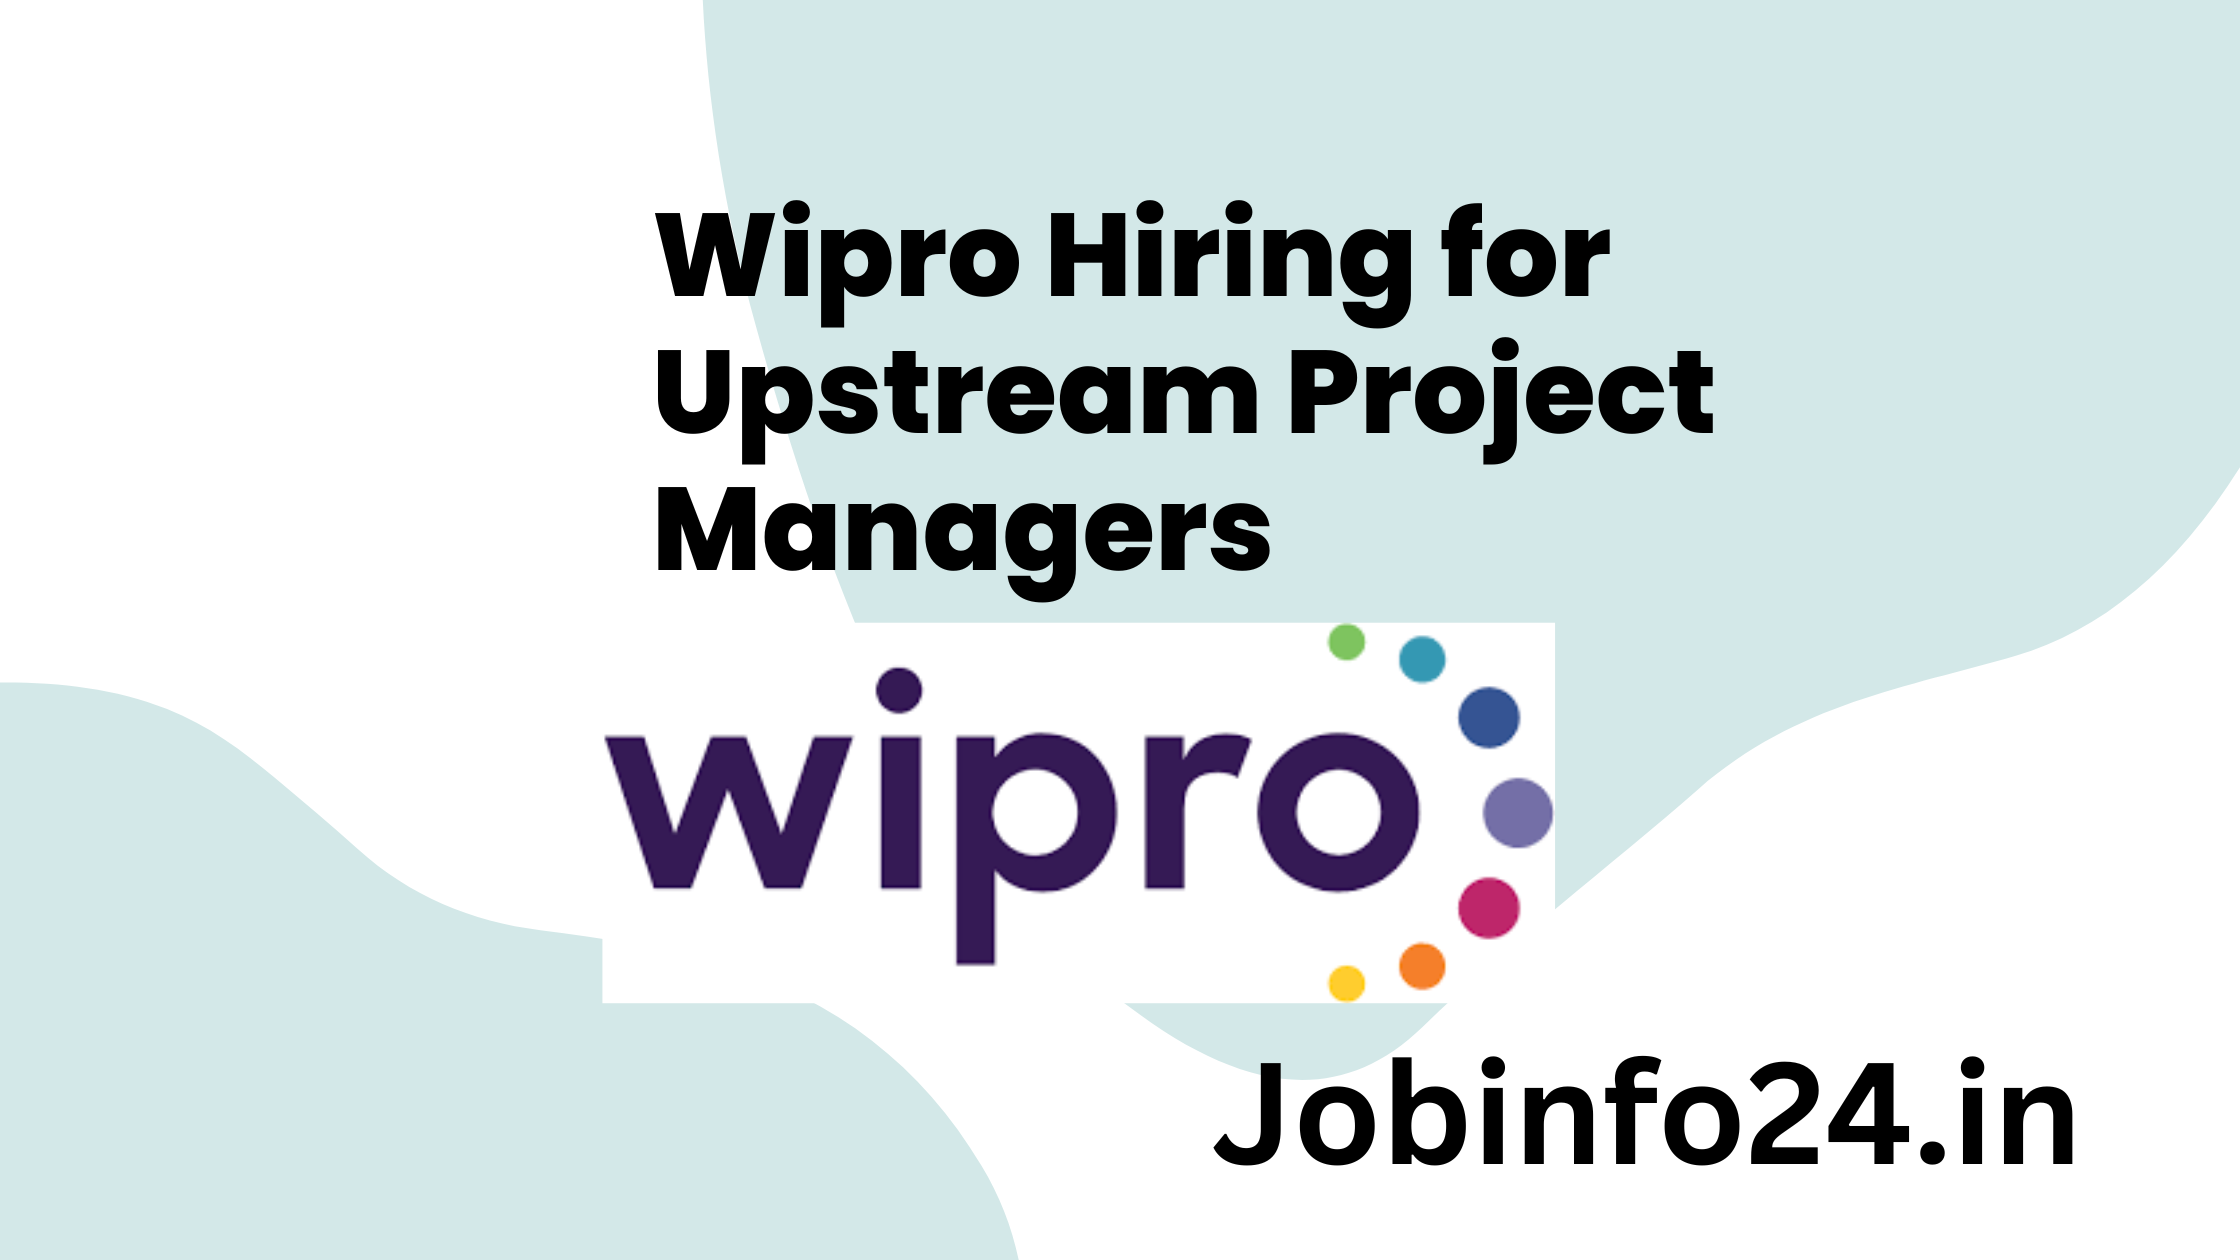 Wipro Hiring for Upstream Project Managers